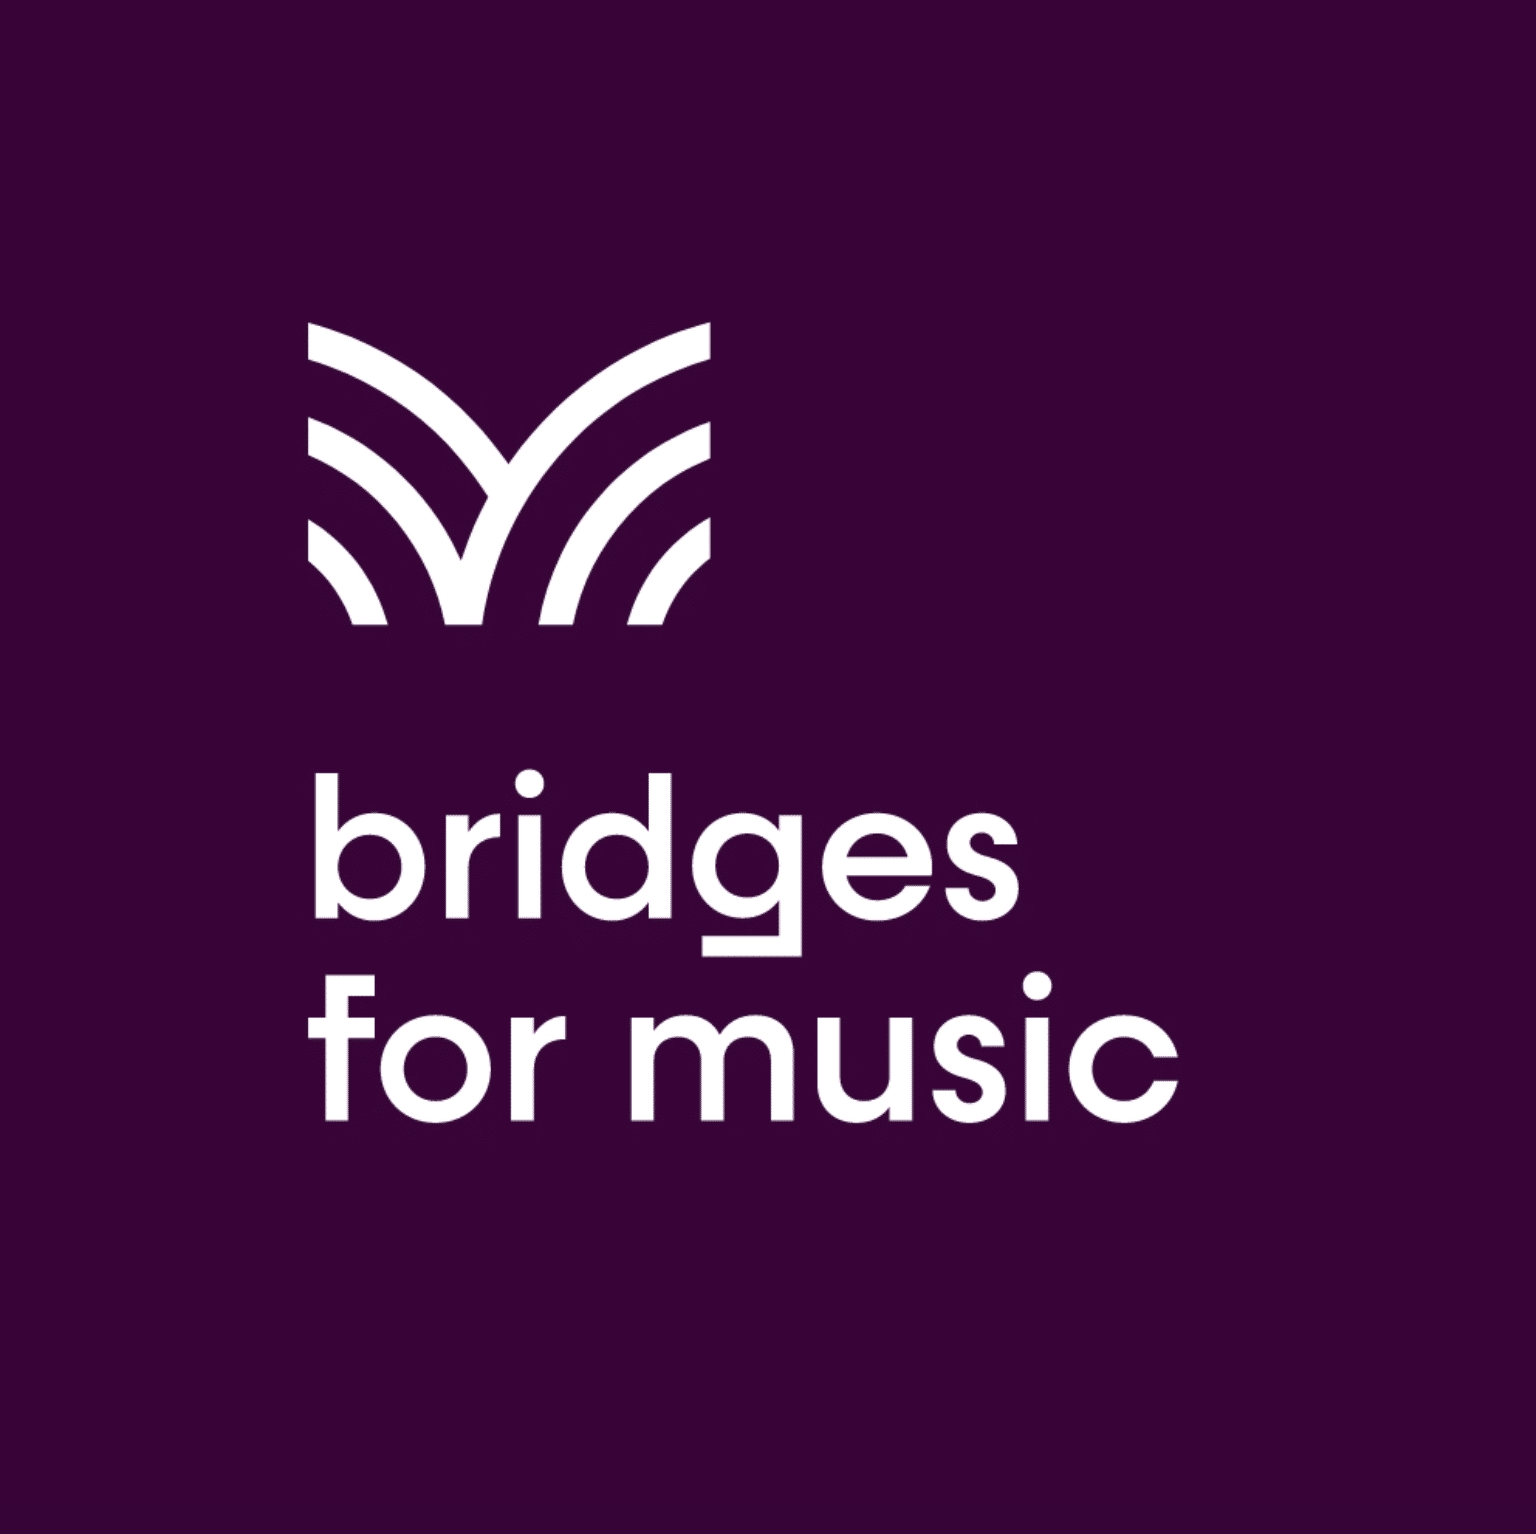 bridges for music. nurturing creativity in young people.